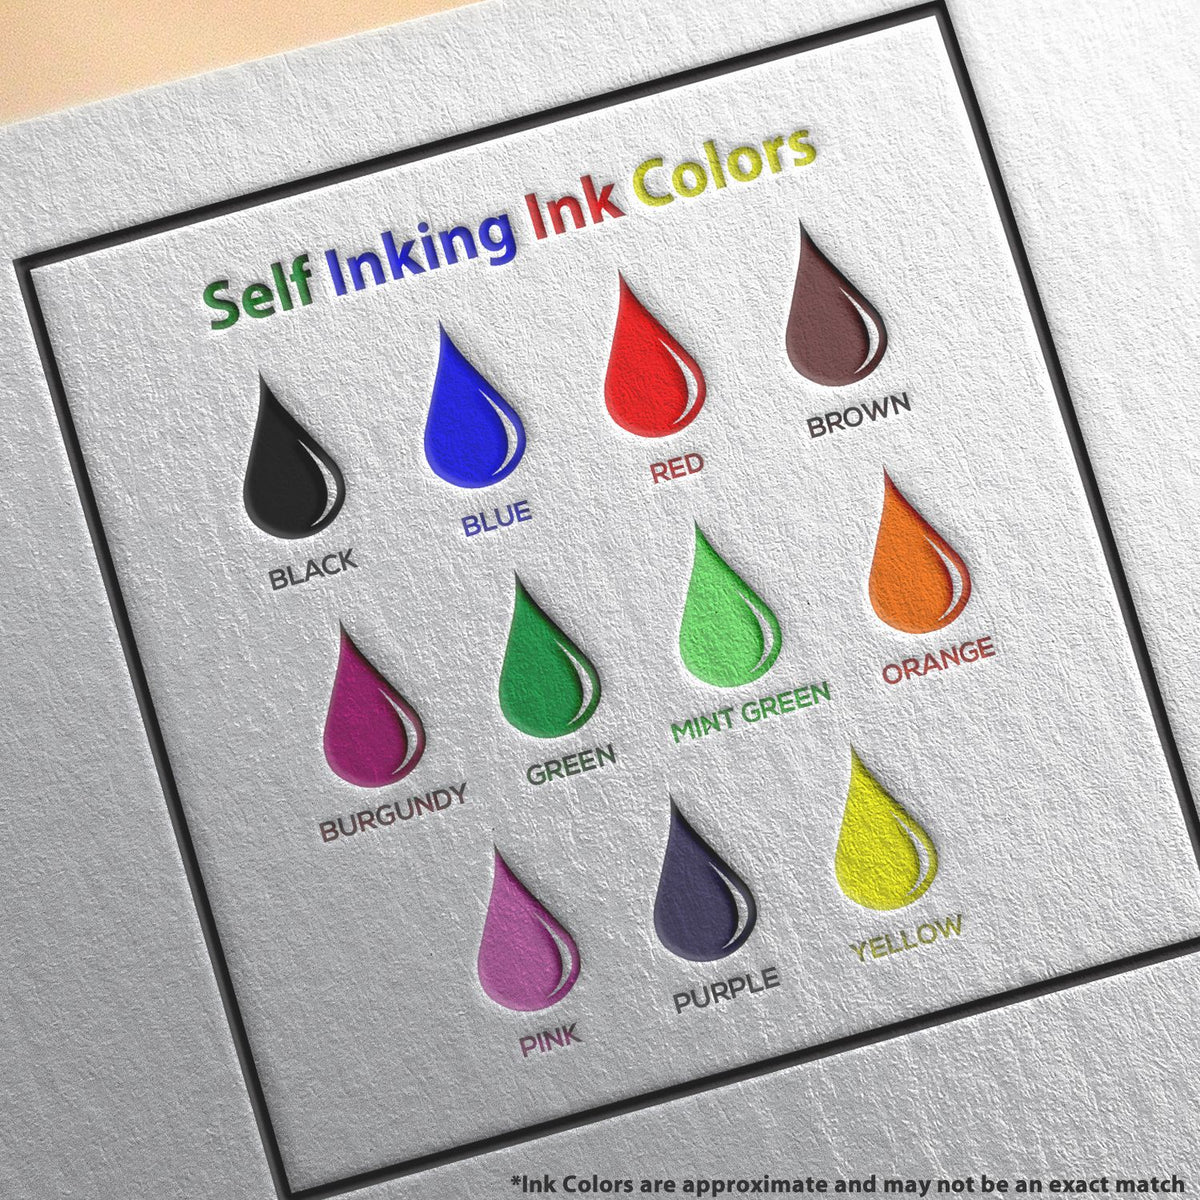 A picture showing the different ink colors or hues available for the Self-Inking Rectangular Idaho Notary Stamp product.